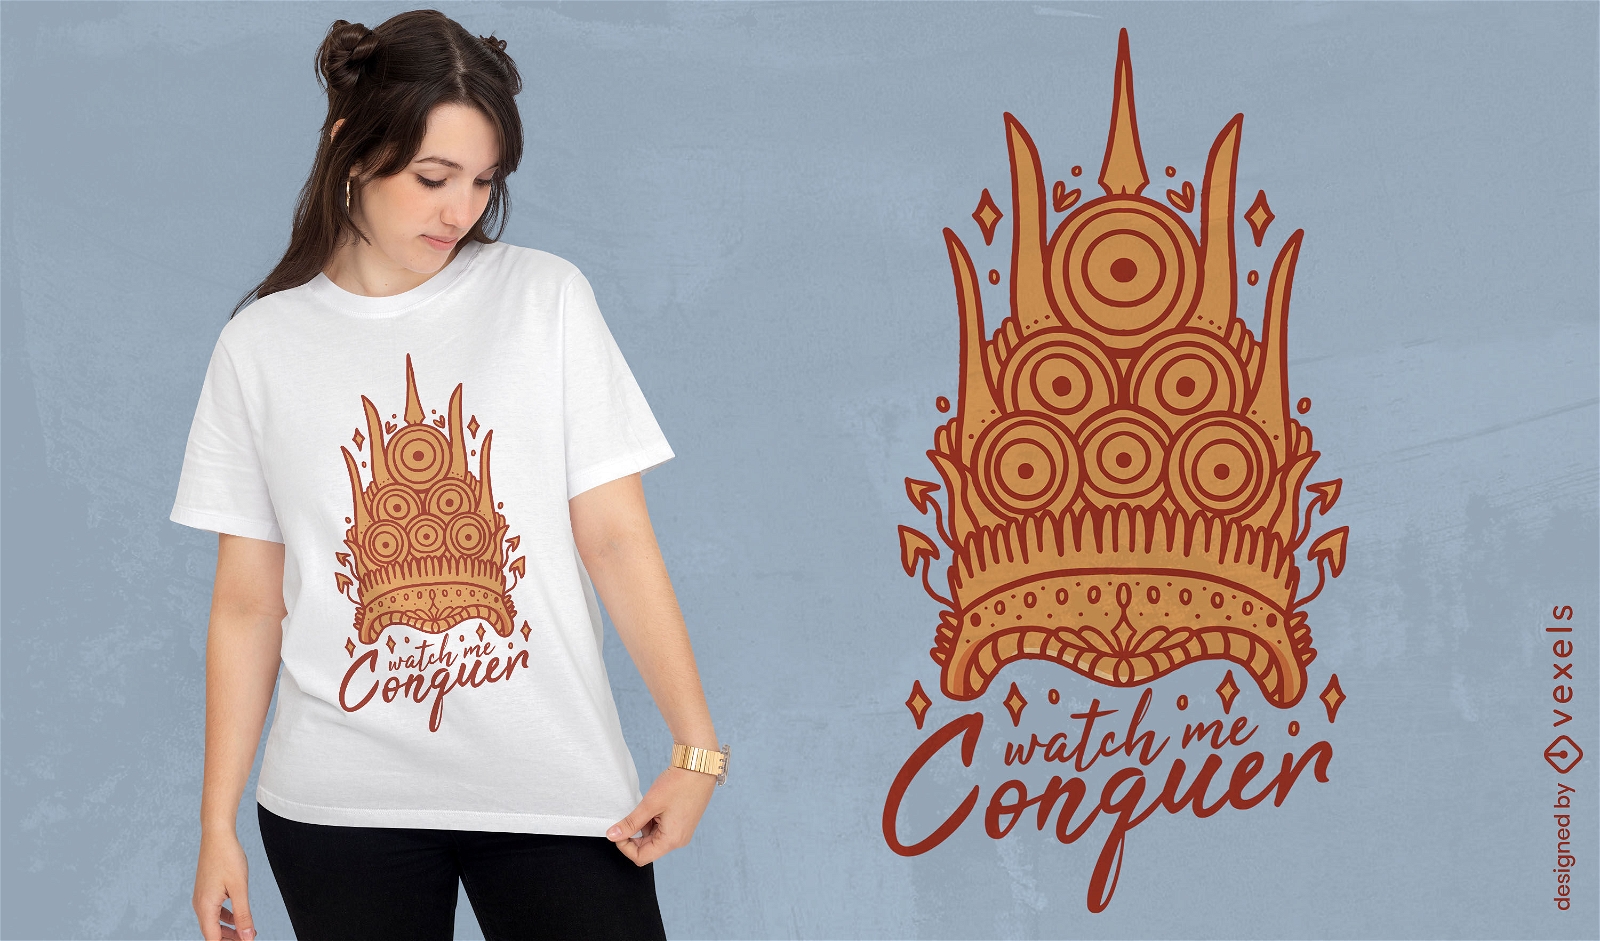 Watch me conquer Cambodian crown t-shirt design